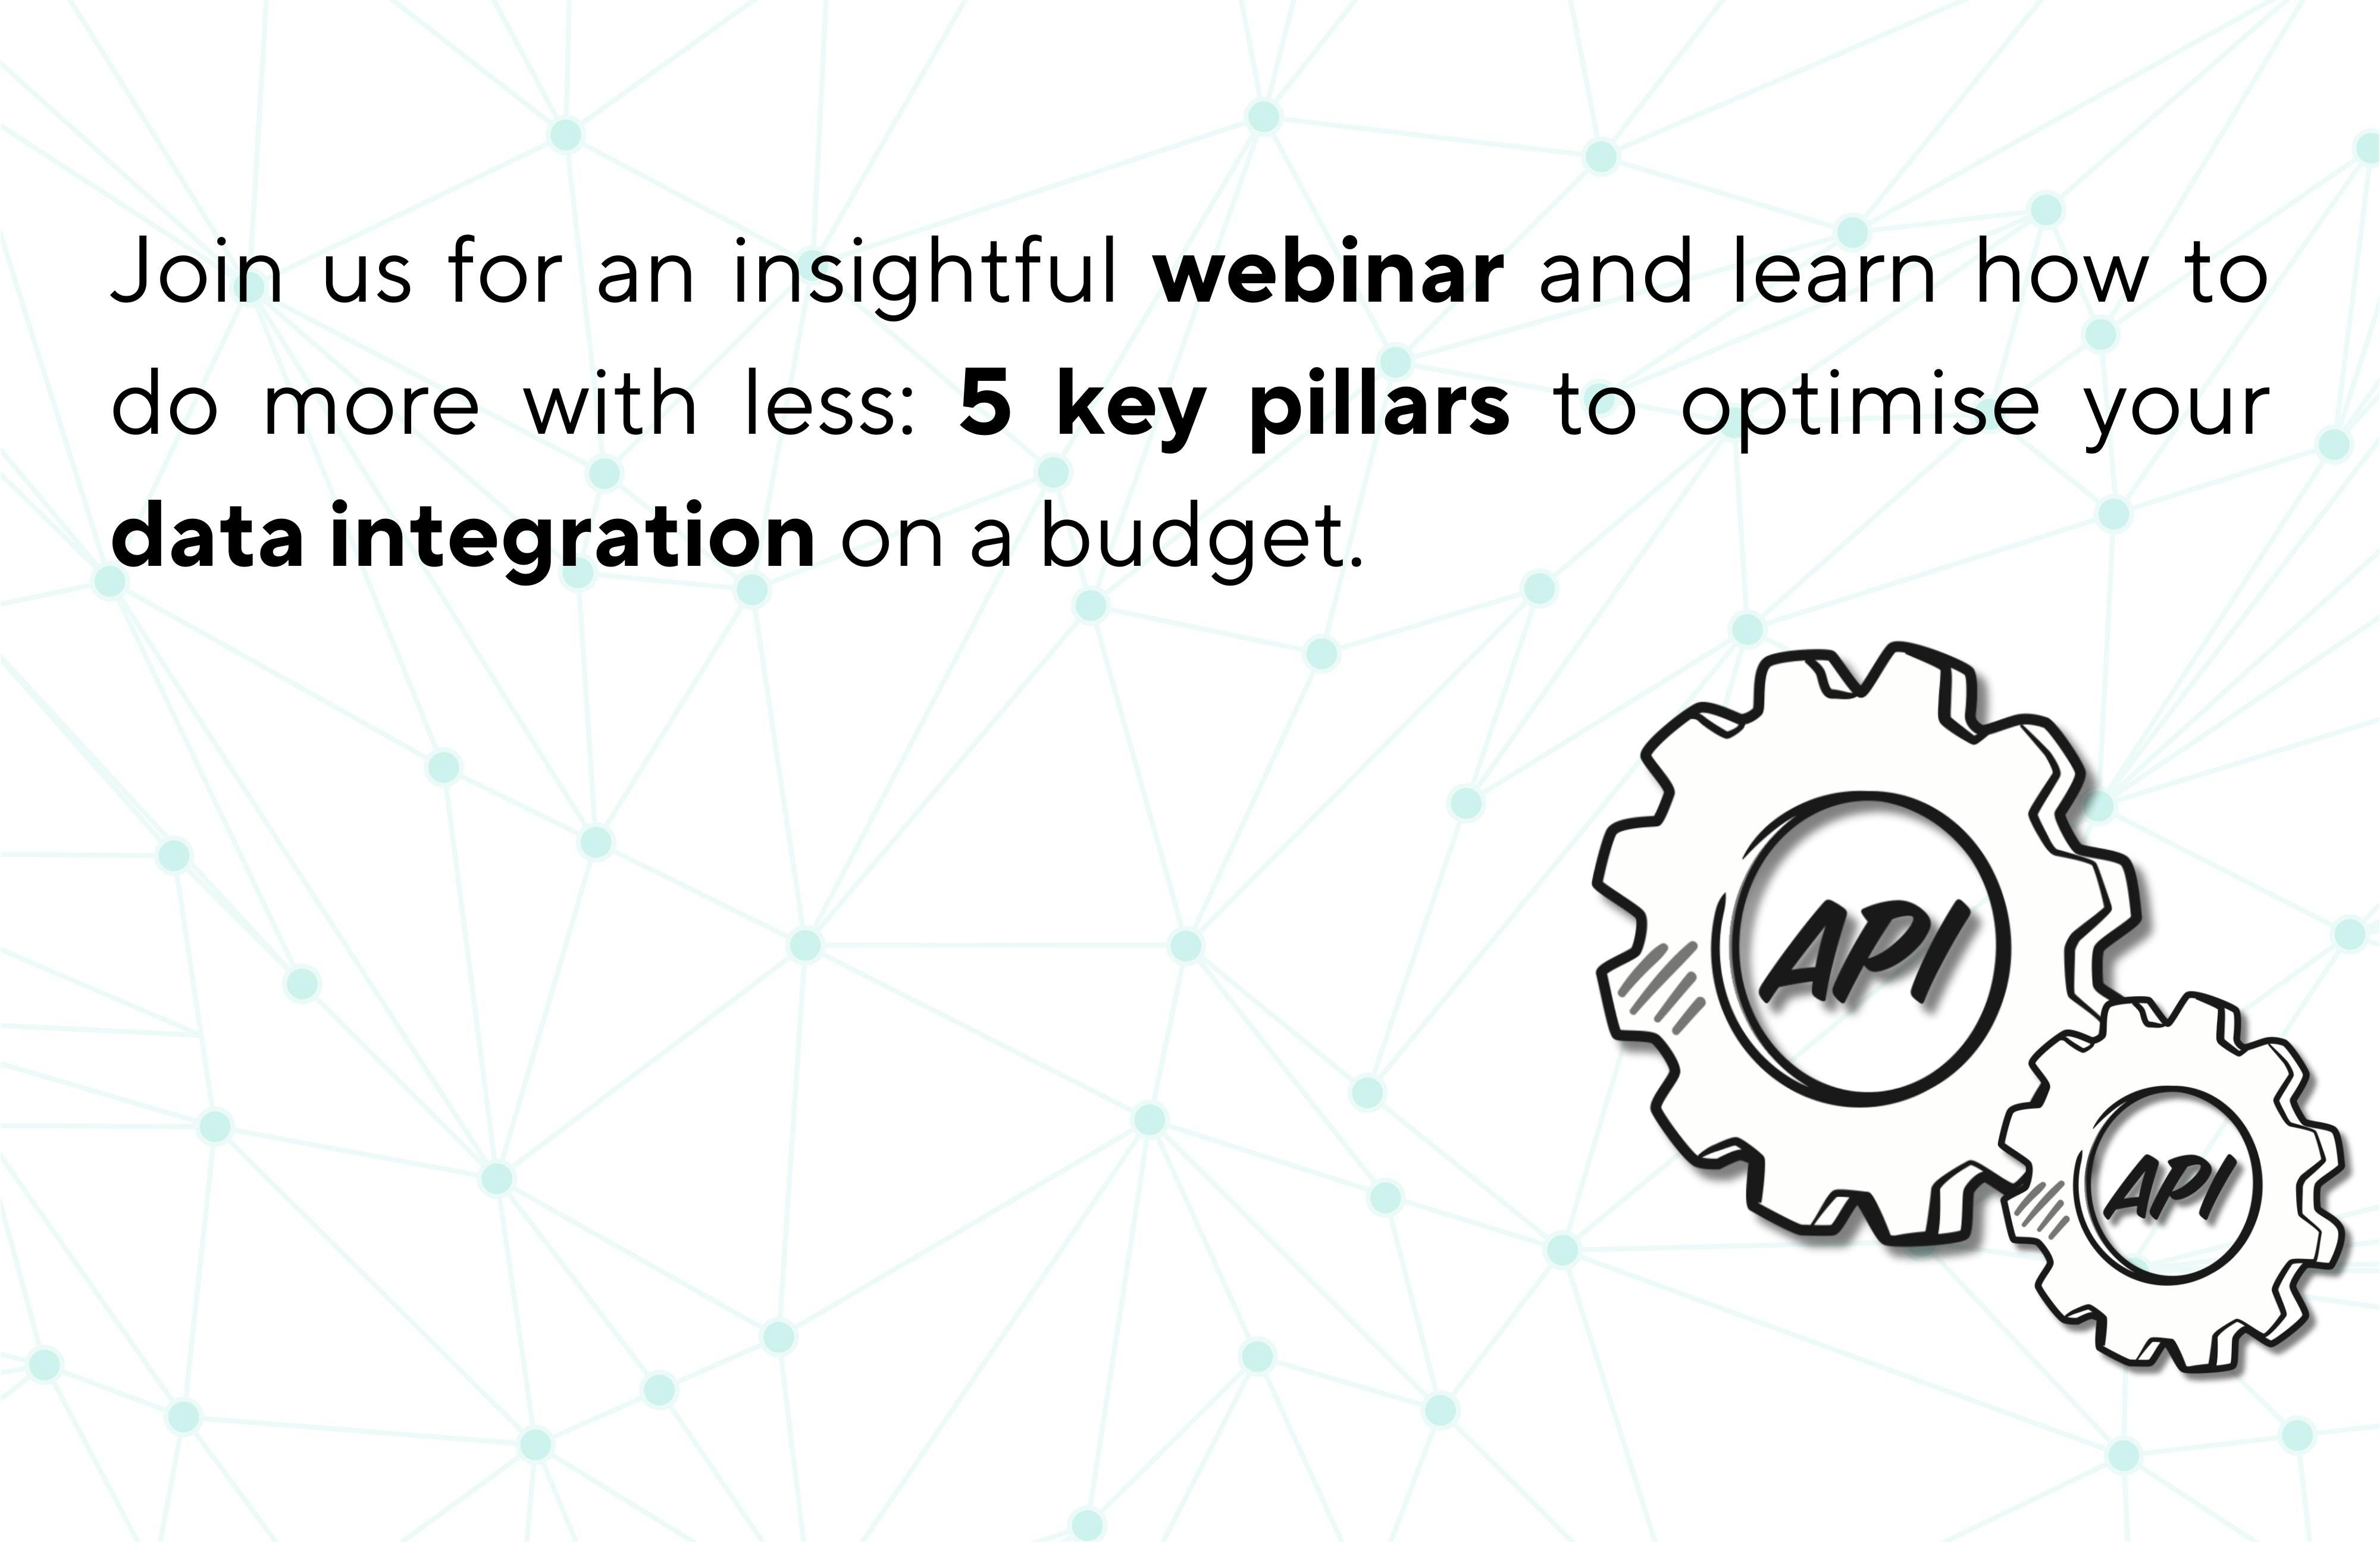 Join us for an insightful webinar and learn how to do more with less: 5 key pillars to optimise your data integration on a budget.